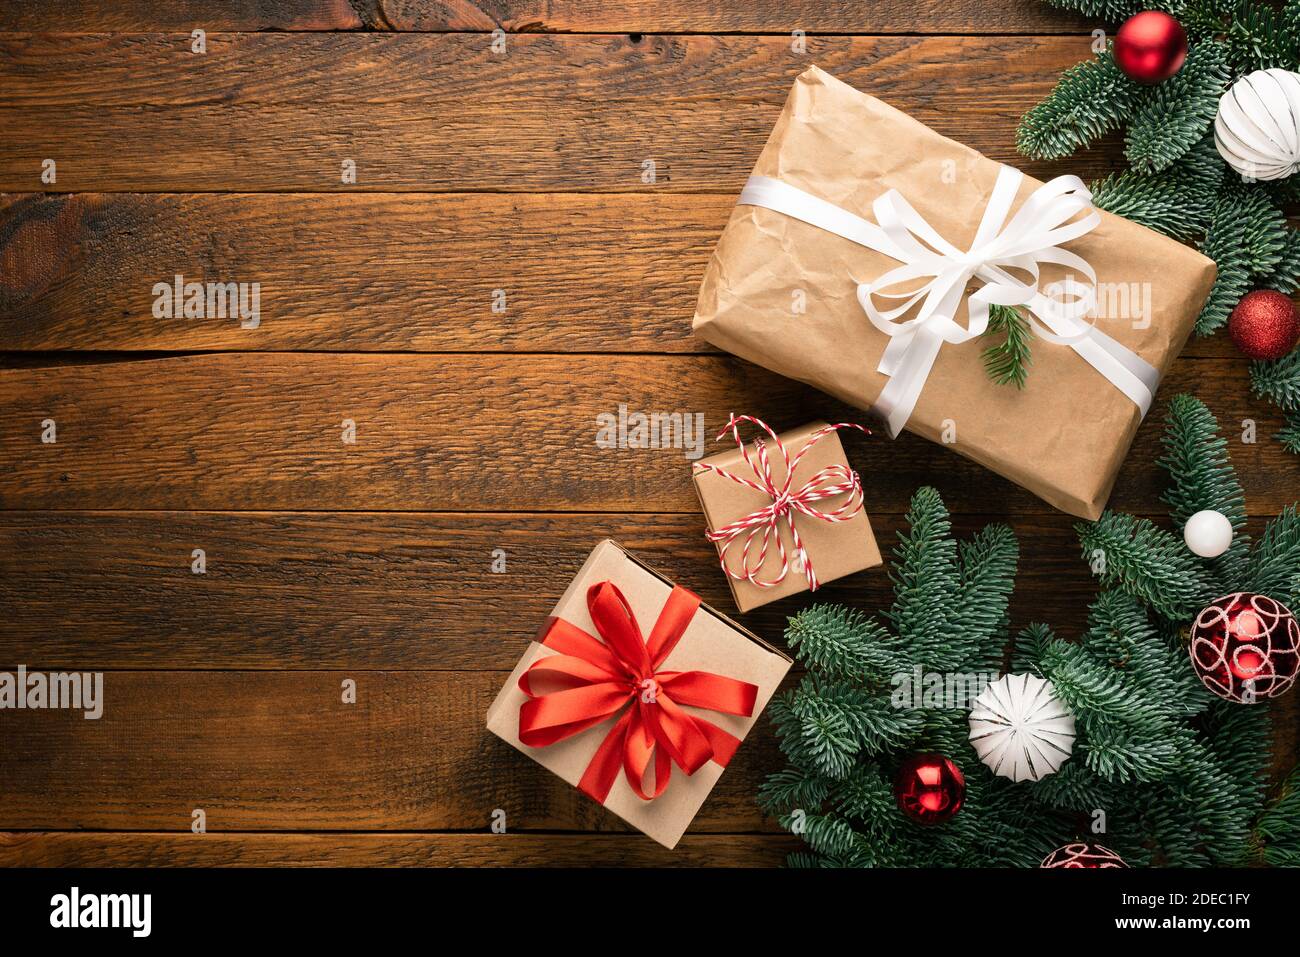 Christmas Gift Boxes On Wooden Background Near Christmas Fir Tree. Top View Copy Space Stock Photo